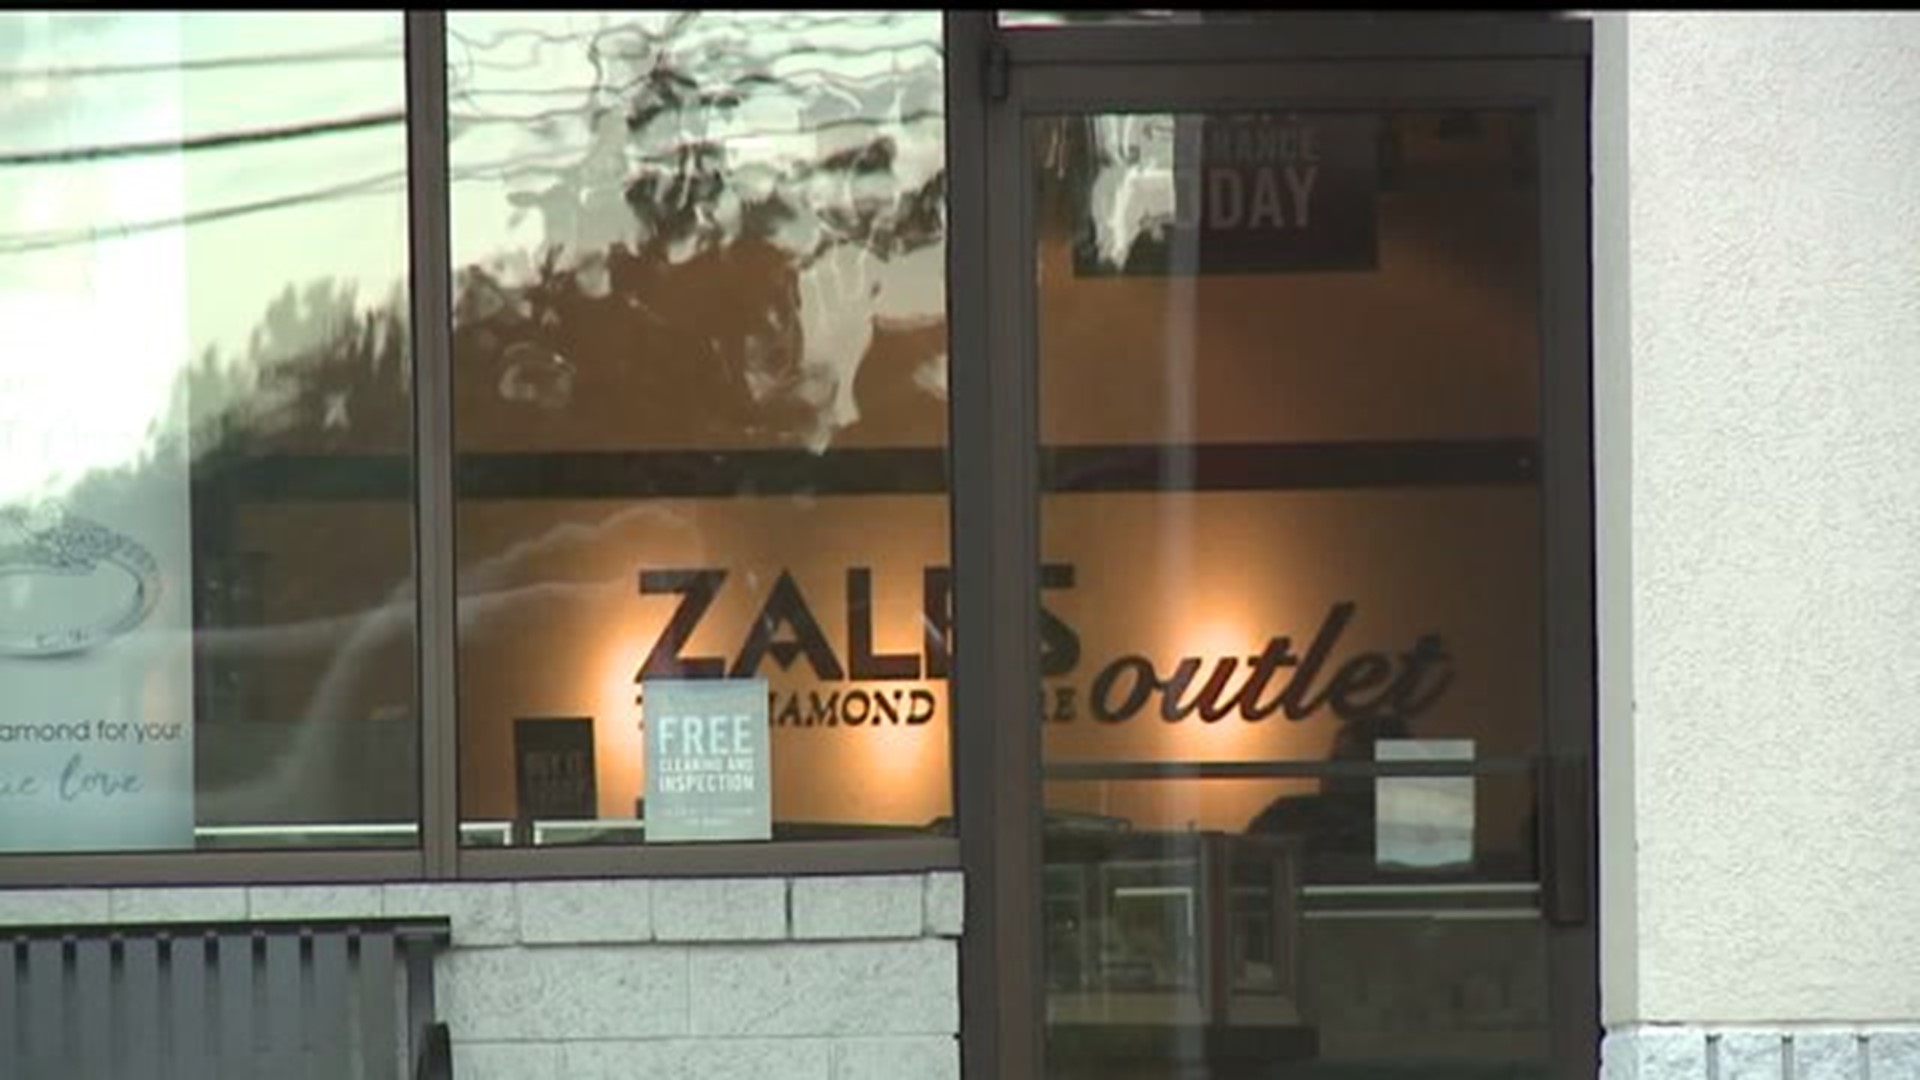 Search for armed man in robbery at Zales Diamond store in Tanger Outlet